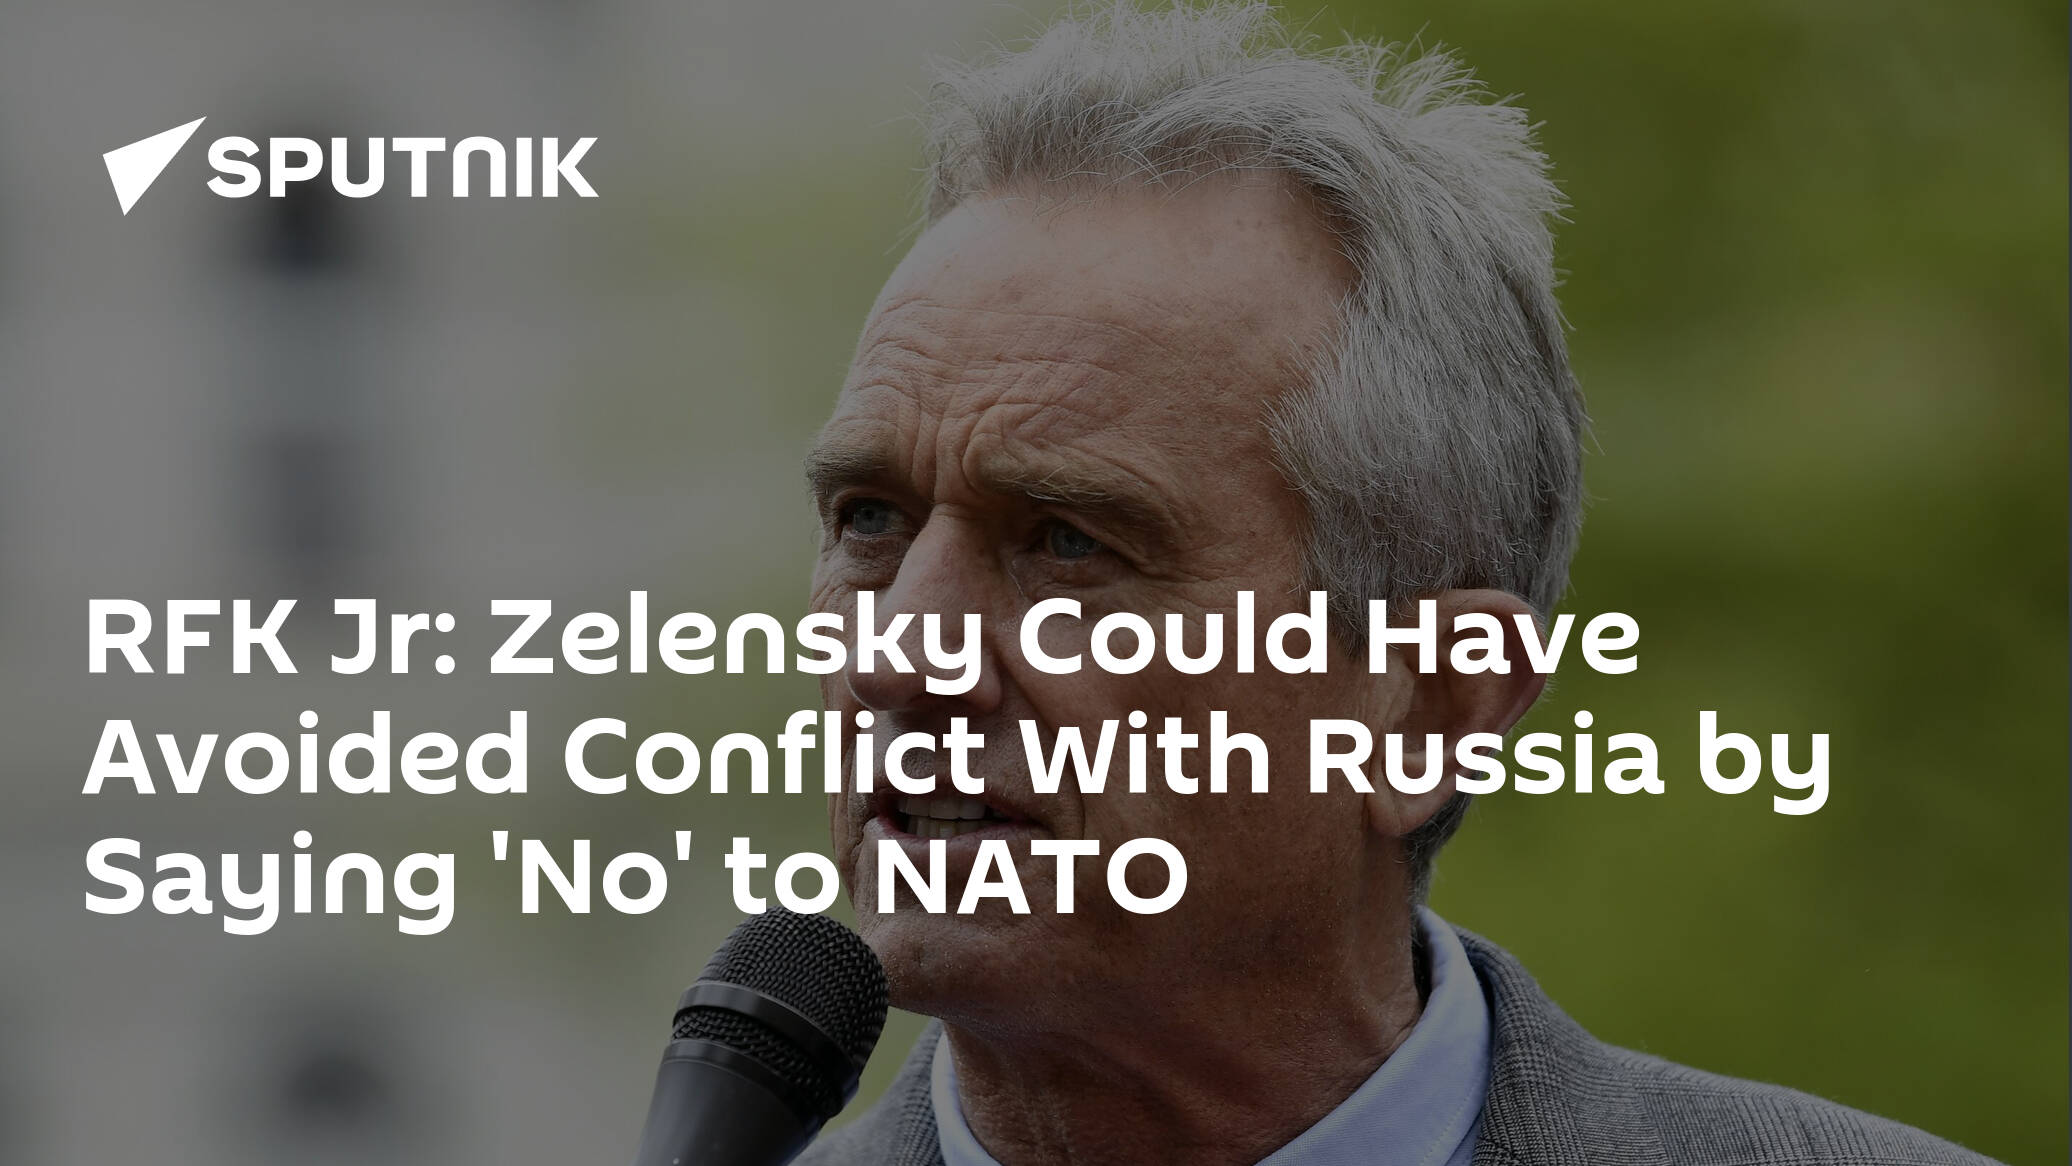 RFK Jr: Zelensky Could Have Avoided Conflict With Russia by Saying 'No' to NATO